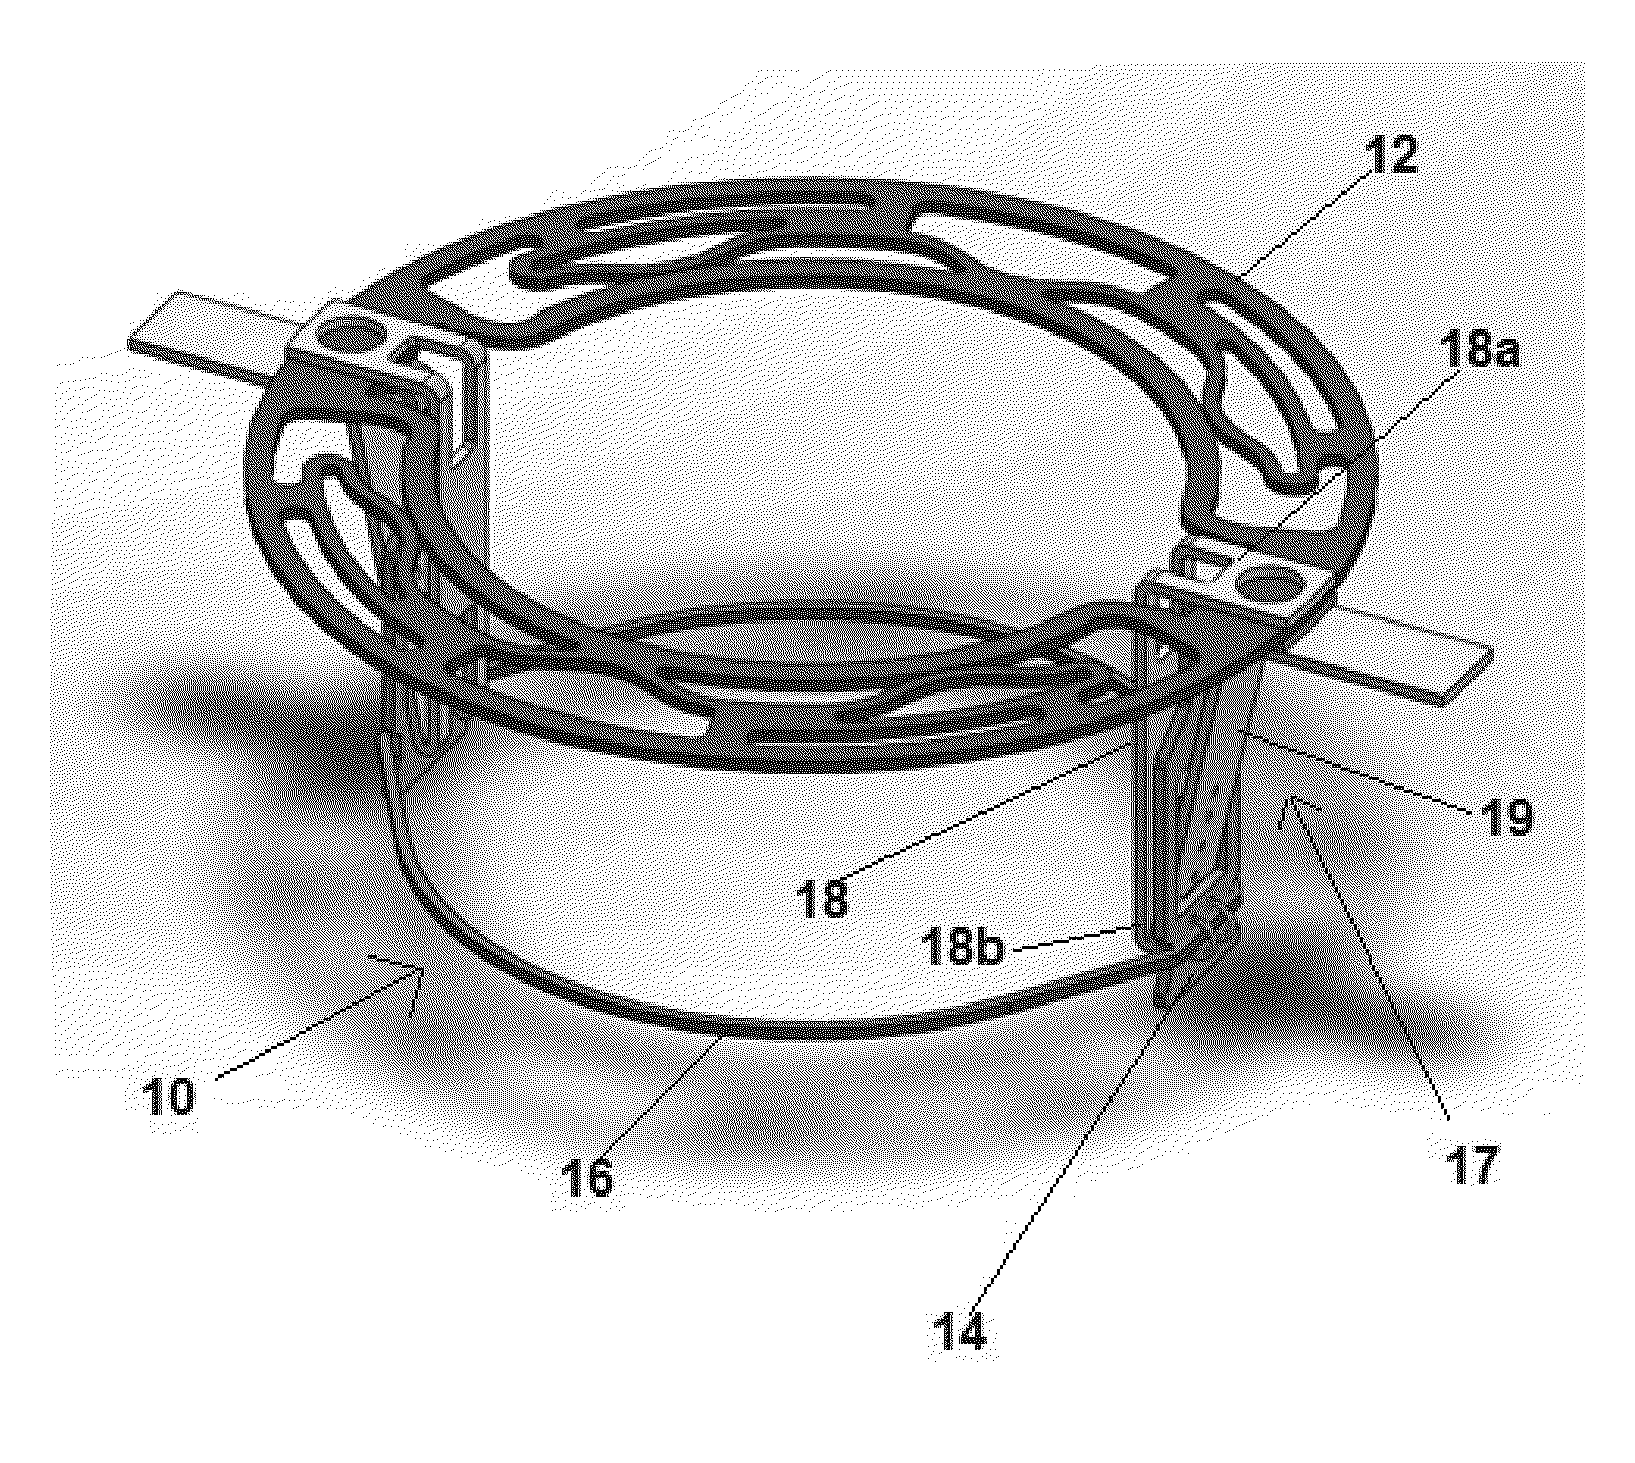 Anchoring elements for intracardiac devices